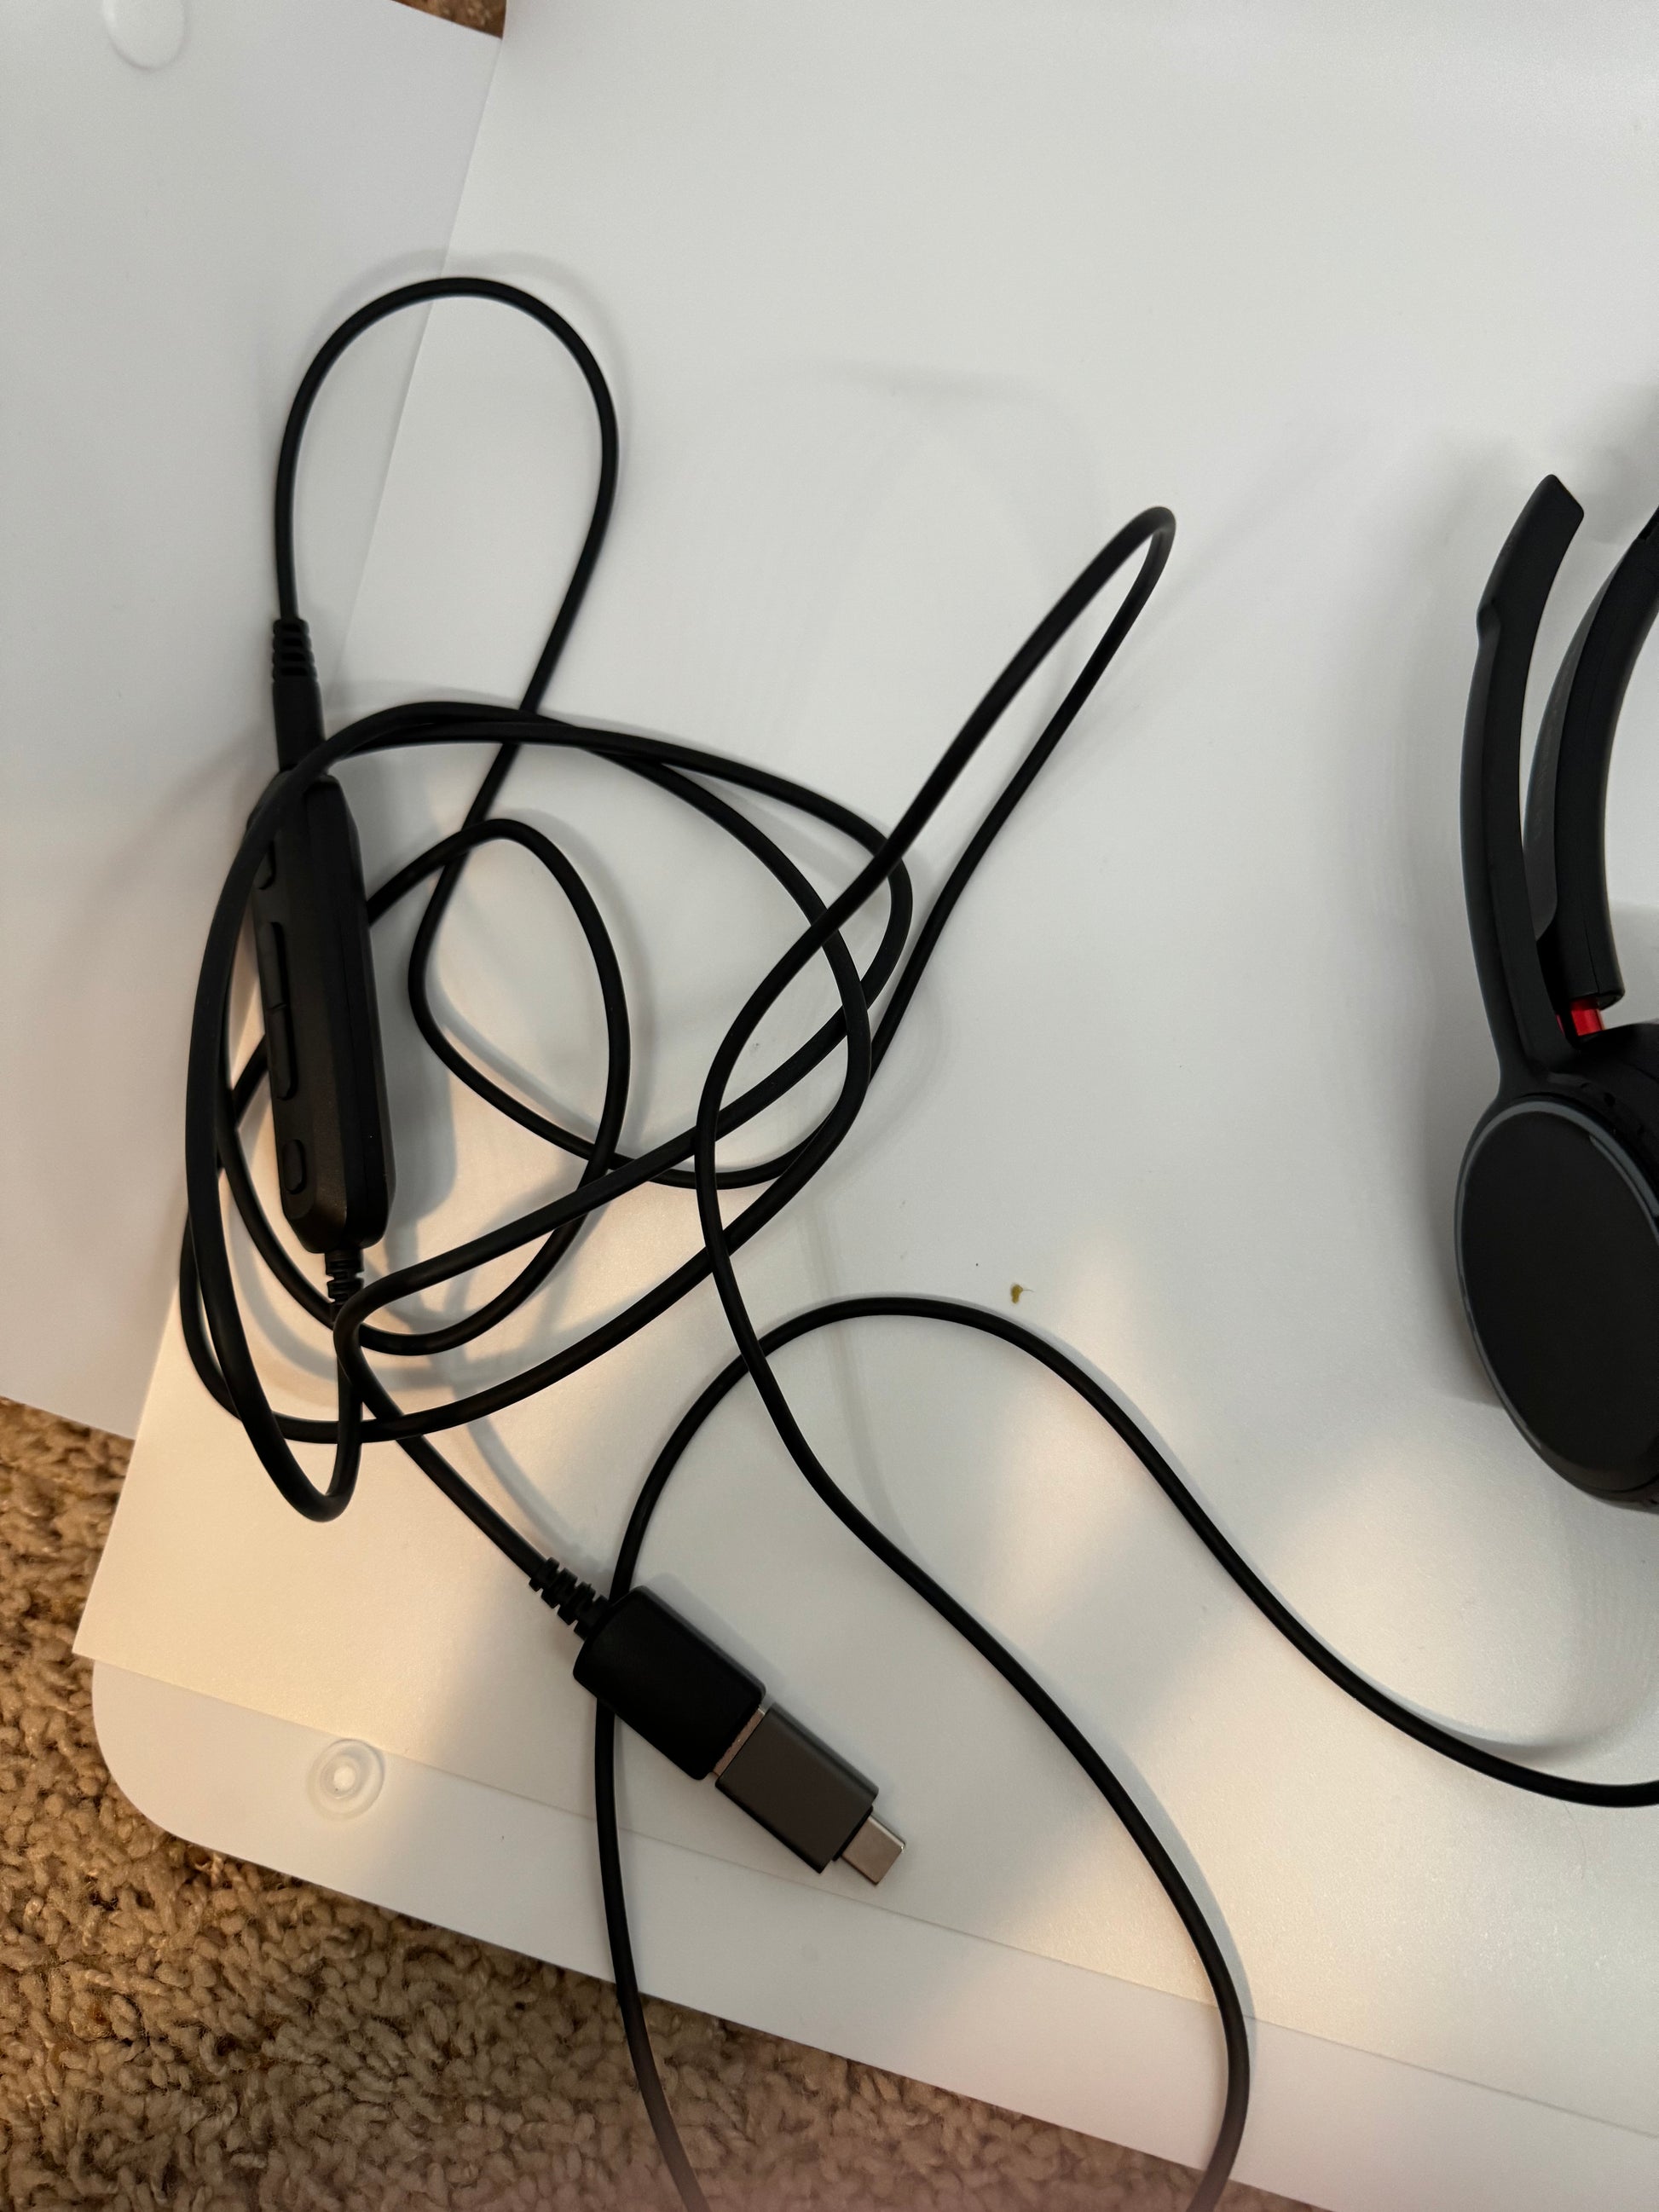 The picture shows a black headset with a long cable. The cable is tangled and has a volume control attached to it. The end of the cable has a USB connector. The headset and cable are placed on a white surface, and the bottom part of the picture shows a beige carpet. The headset appears to have a cushioned earpiece and a red accent on the side.